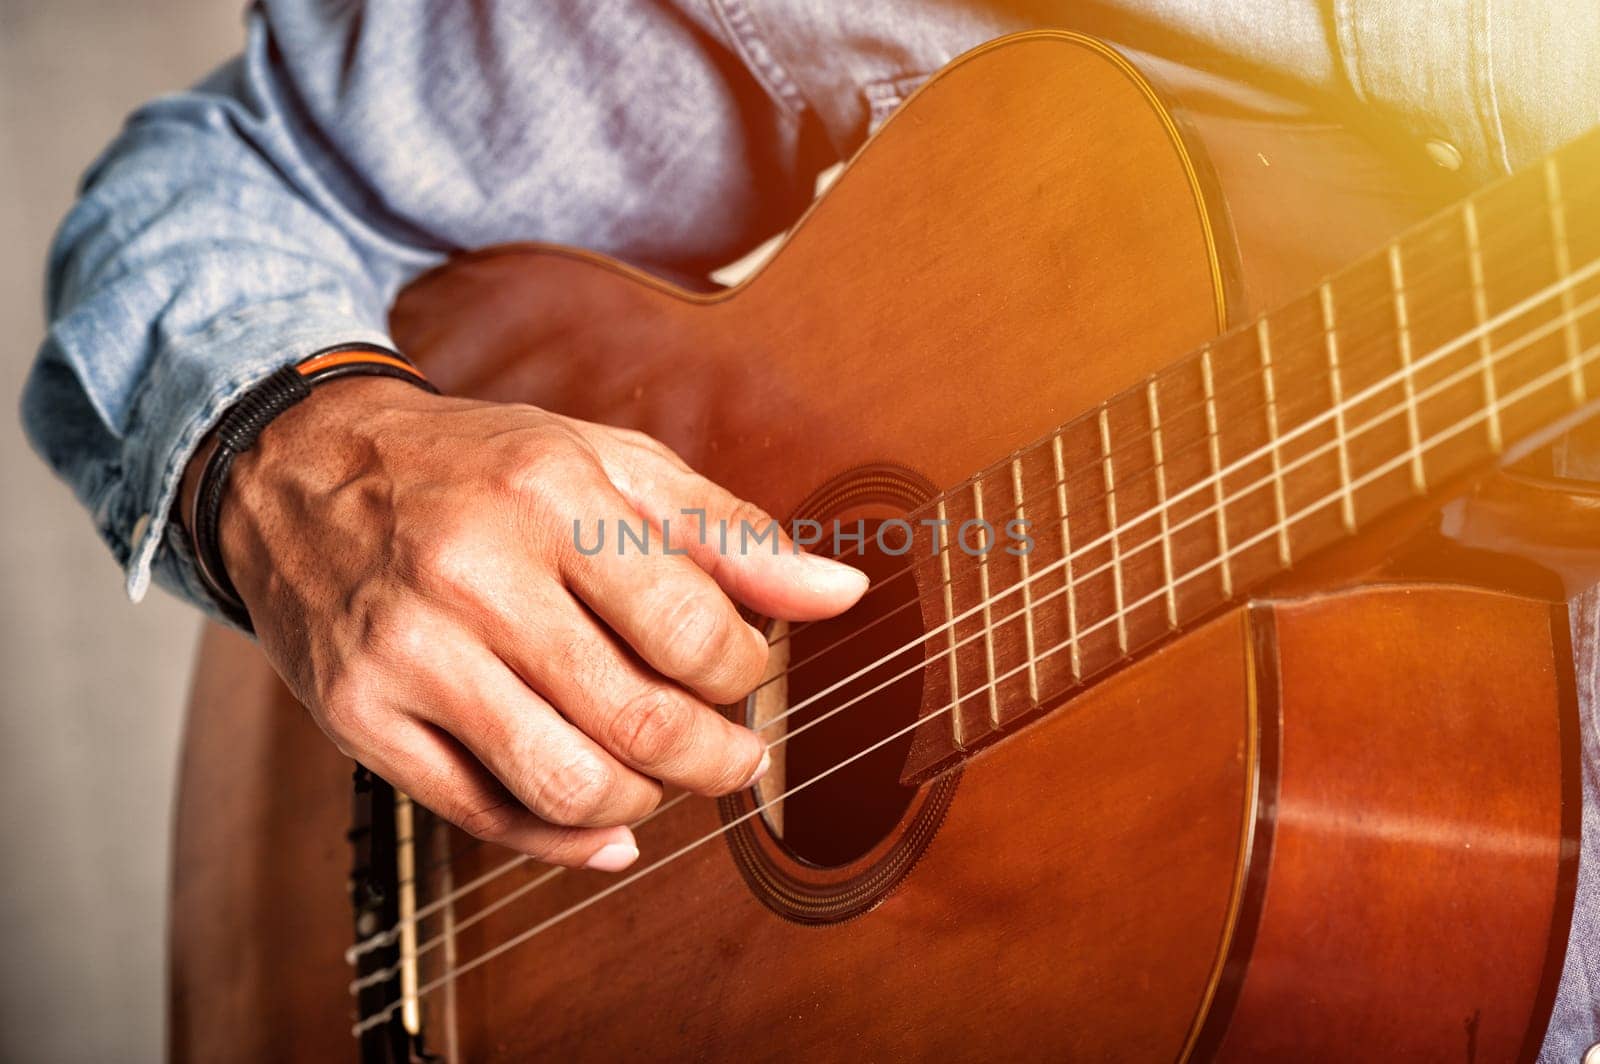 playing classical guitar by norgal